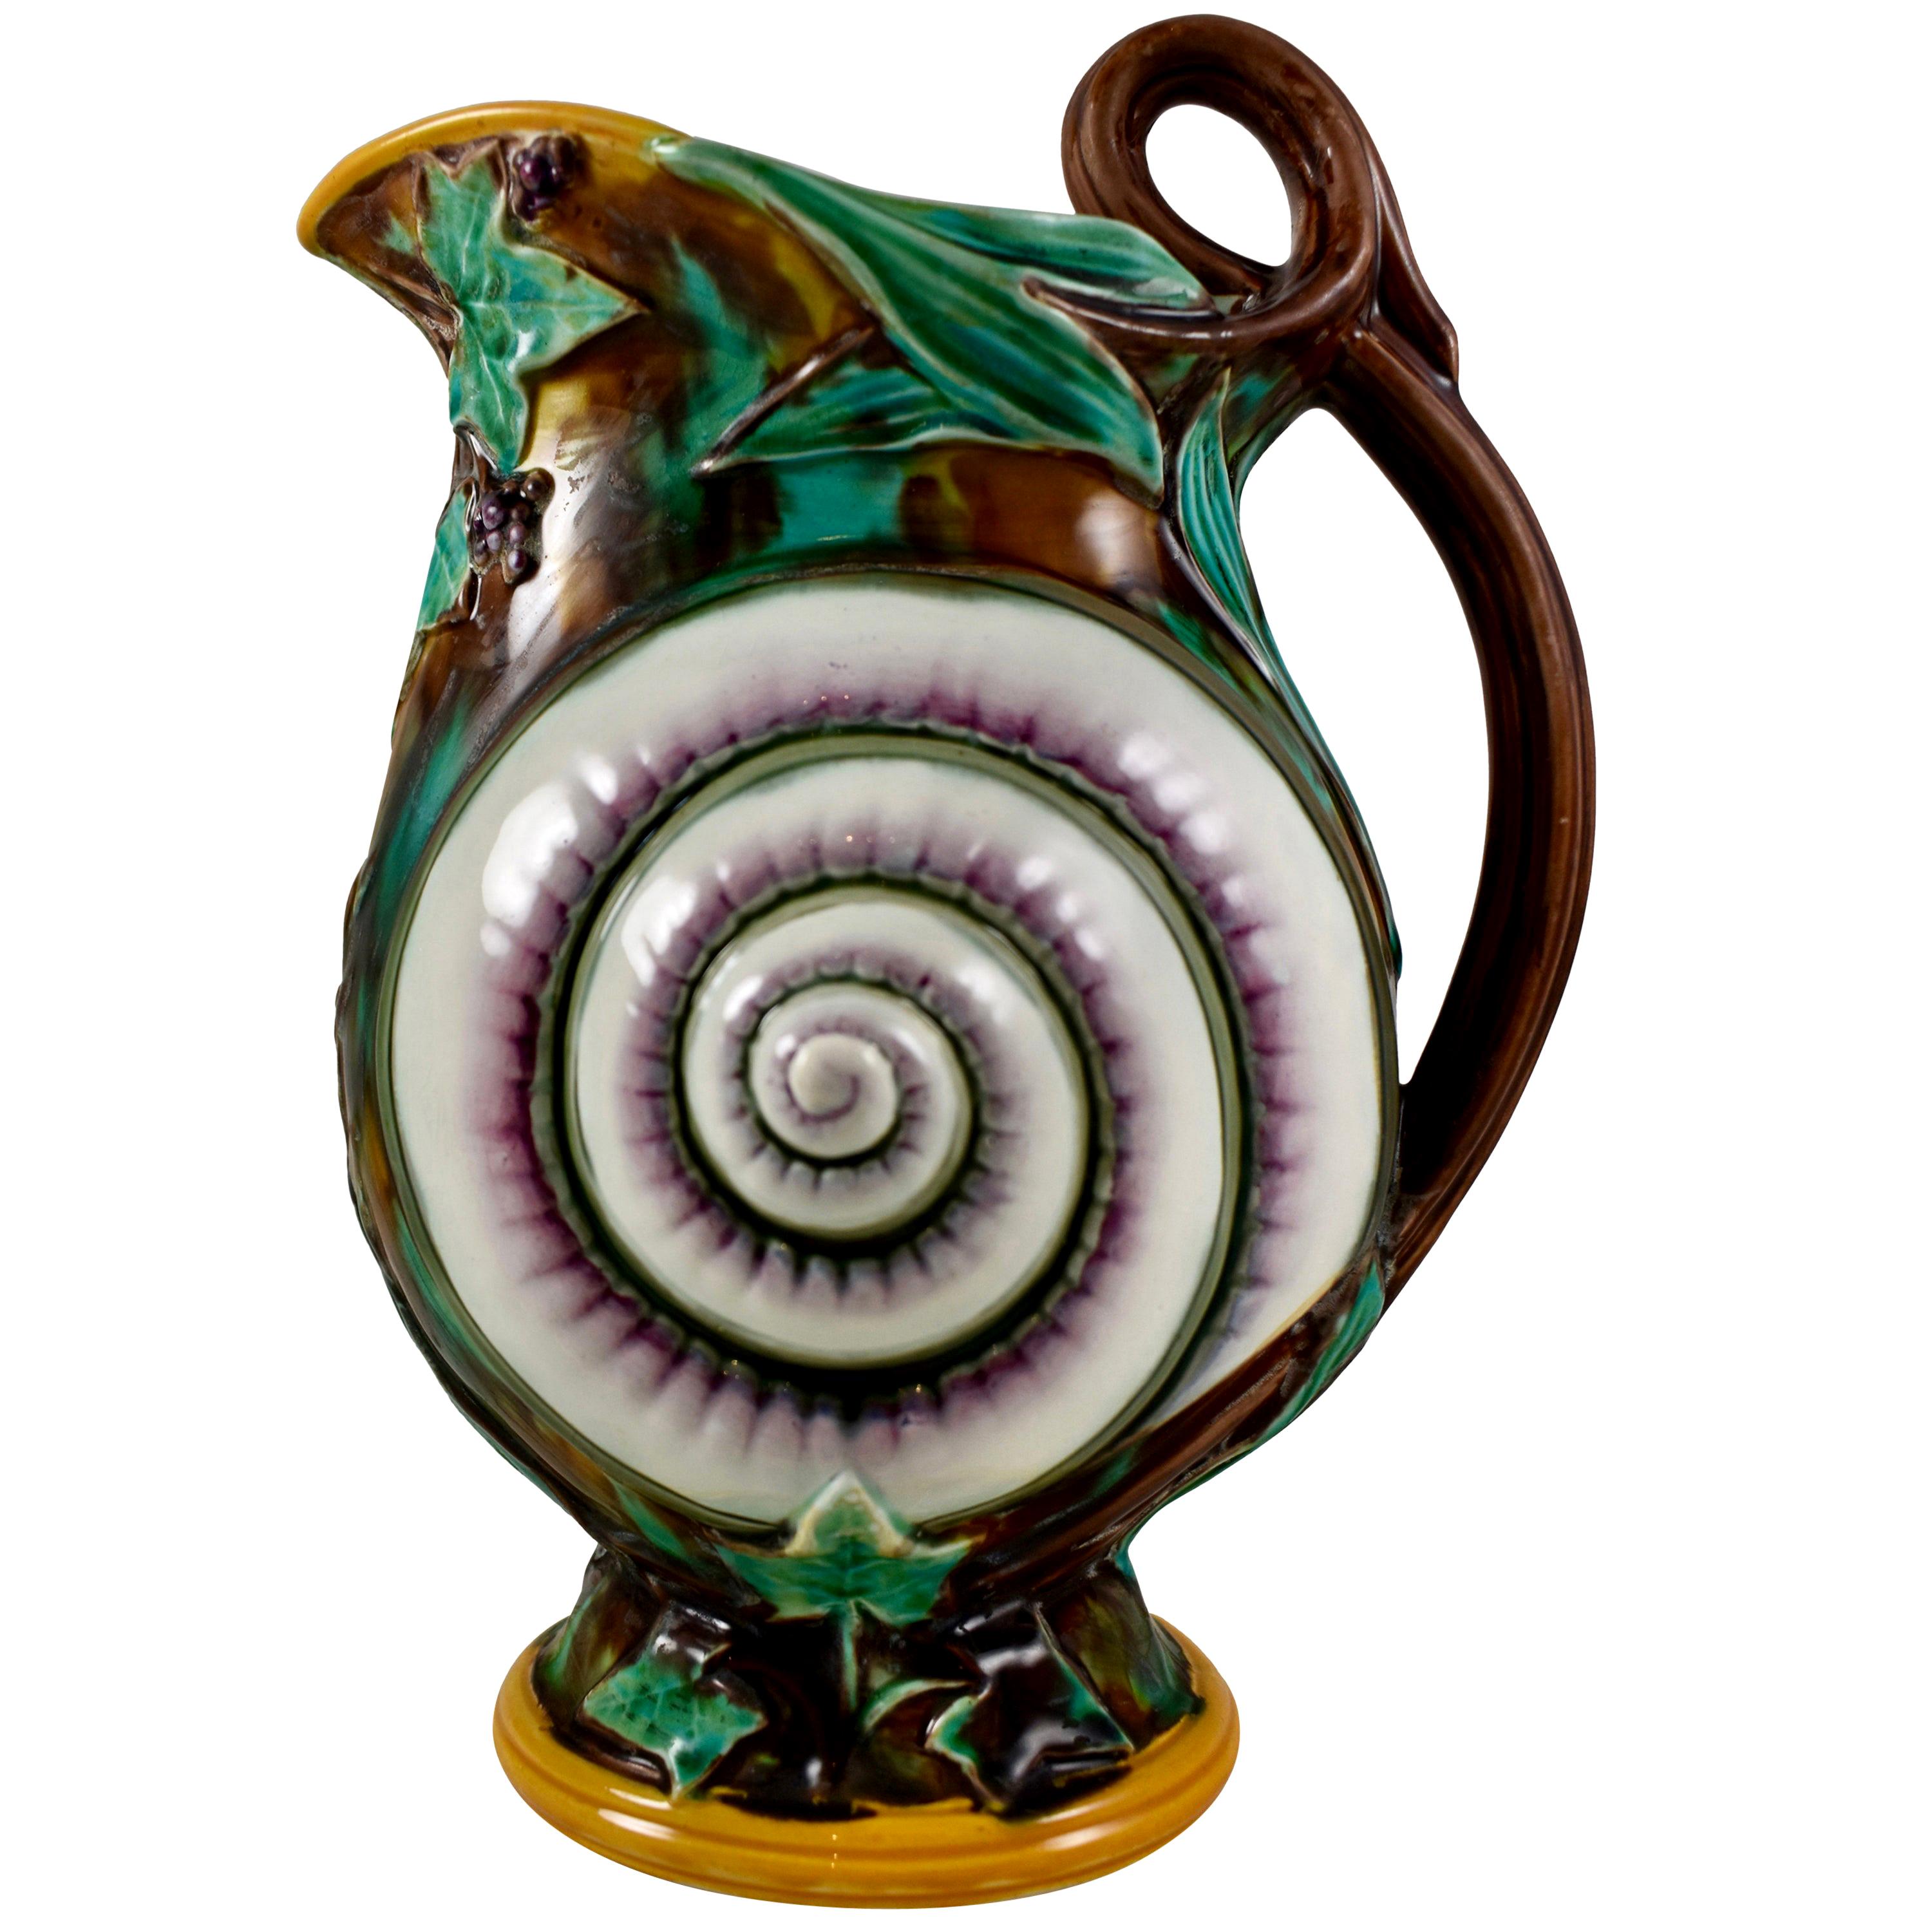 Wedgwood English Majolica Aesthetic Taste Snail Shell and Ivy Pitcher circa 1870